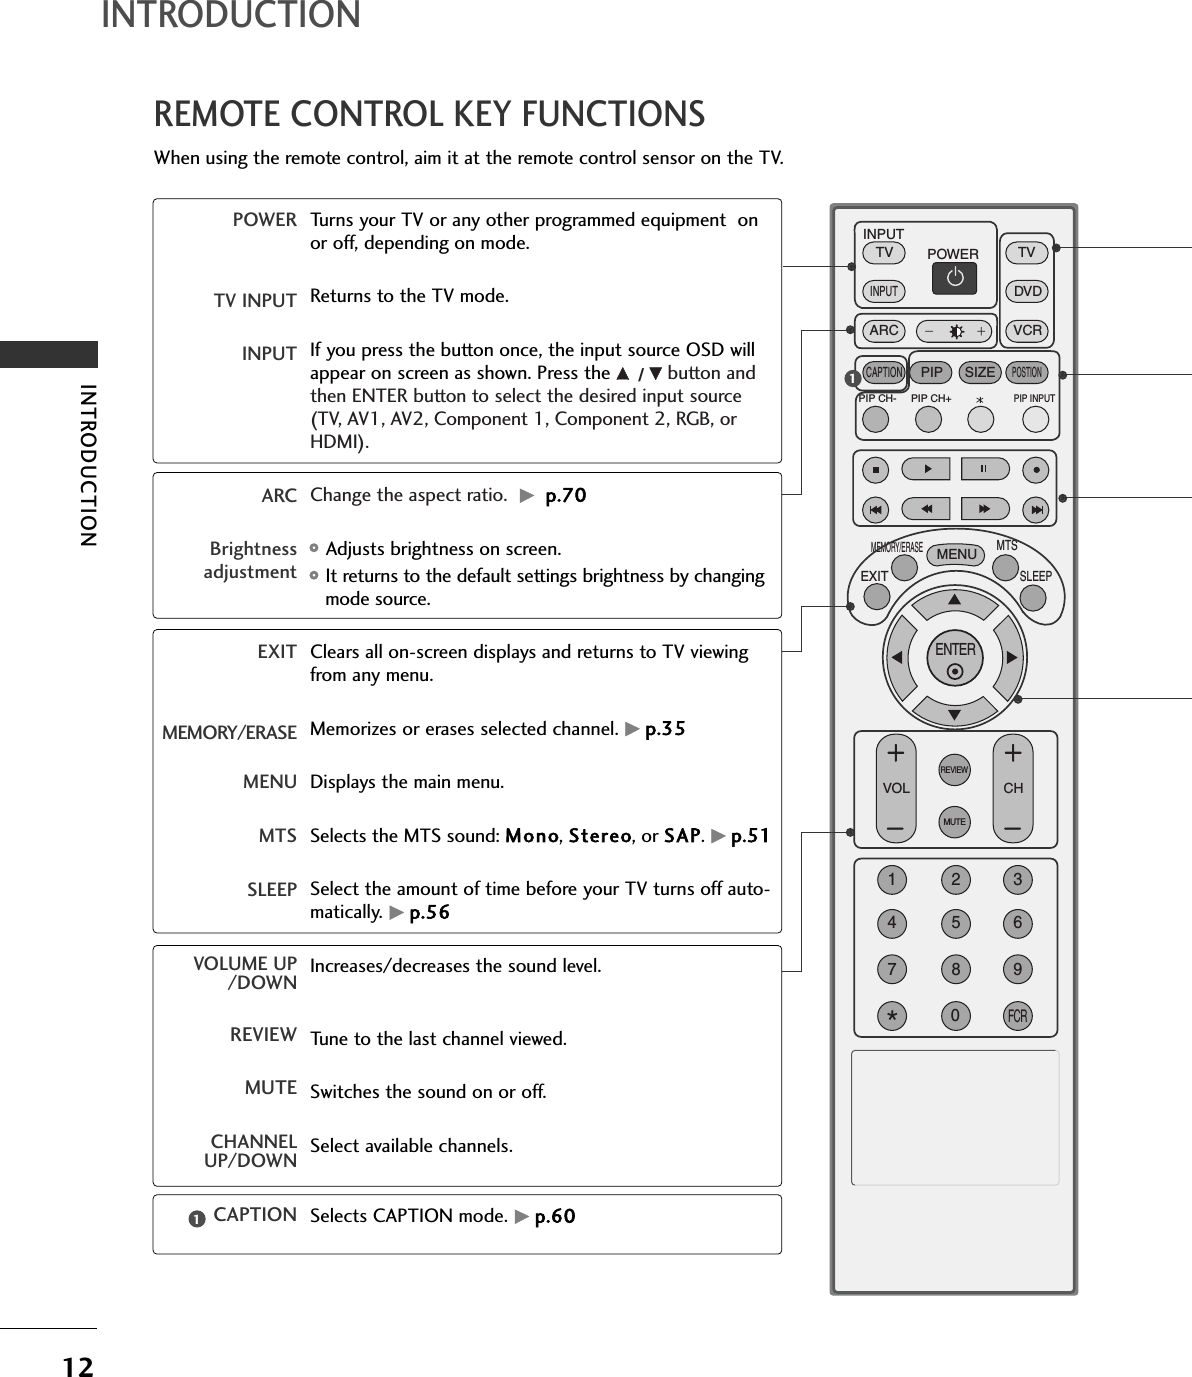 INTRODUCTION12INTRODUCTIONREMOTE CONTROL KEY FUNCTIONSWhen using the remote control, aim it at the remote control sensor on the TV.ENTERINPUTTVTVINPUTPIP CH- PIP CH+PIP INPUTDVDARCEXITVOLREVIEWMUTECHSLEEPMEMORY/ERASEMENUCAPTIONPIP SIZEPOSTIONVCRPOWER123456789*0MTSFCRPOWERTV INPUTINPUTARCBrightnessadjustmentEXITMEMORY/ERASEMENUMTSSLEEPVOLUME UP/DOWNREVIEWMUTECHANNELUP/DOWNCAPTIONTurns your TV or any other programmed equipment  onor off, depending on mode.Returns to the TV mode. If you press the button once, the input source OSD willappear on screen as shown. Press the DD/Ebutton andthen ENTER button to select the desired input source(TV, AV1, AV2, Component 1, Component 2, RGB, orHDMI).Change the aspect ratio. Gp.70Adjusts brightness on screen. It returns to the default settings brightness by changingmode source.Clears all on-screen displays and returns to TV viewingfrom any menu.Memorizes or erases selected channel. Gp.35Displays the main menu.Selects the MTS sound: Mono, Stereo, or SAP. Gp.51Select the amount of time before your TV turns off auto-matically. Gp.56Increases/decreases the sound level.Tune to the last channel viewed.Switches the sound on or off.Select available channels.Selects CAPTION mode. Gp.6011